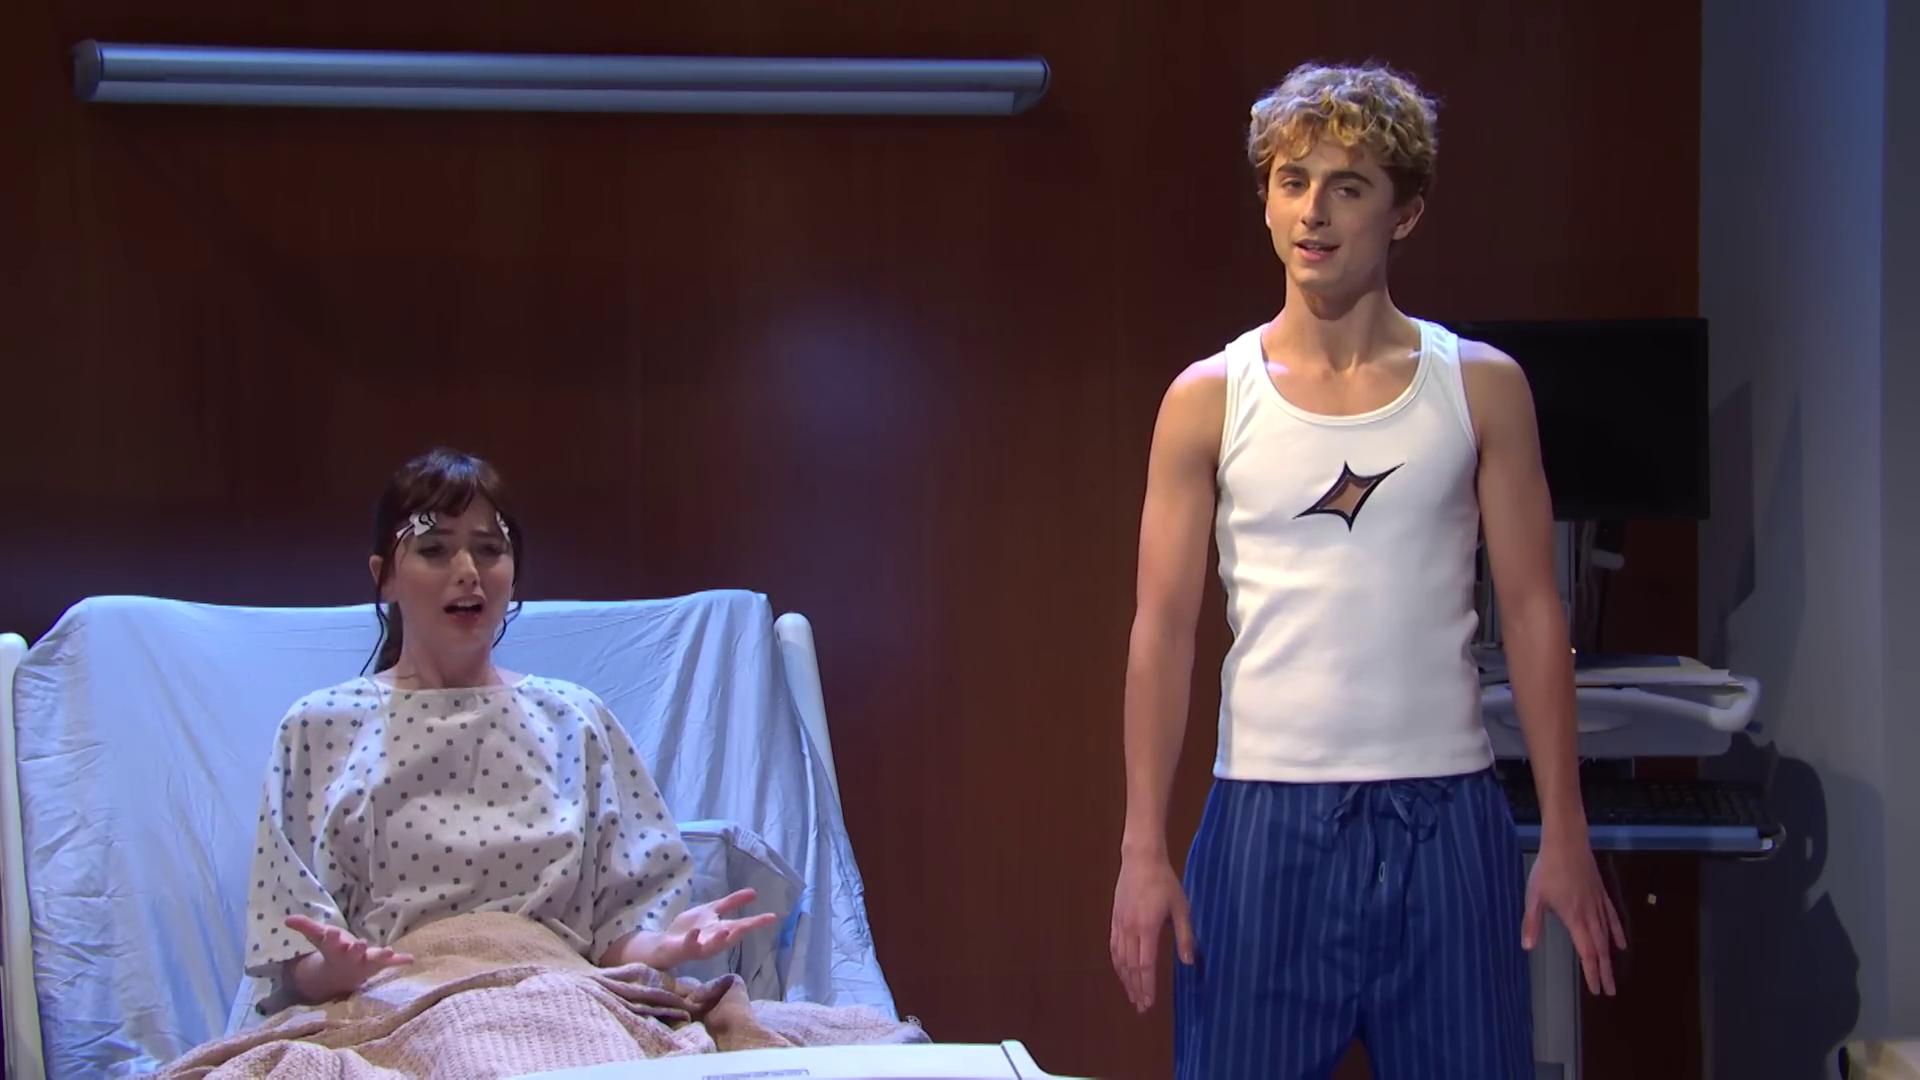 Timothee Chalamet dressed up as the pop star Troye Sivan on Saturday Night Live (SNL). He’s wearing baggy pants and a tight white shirt. 